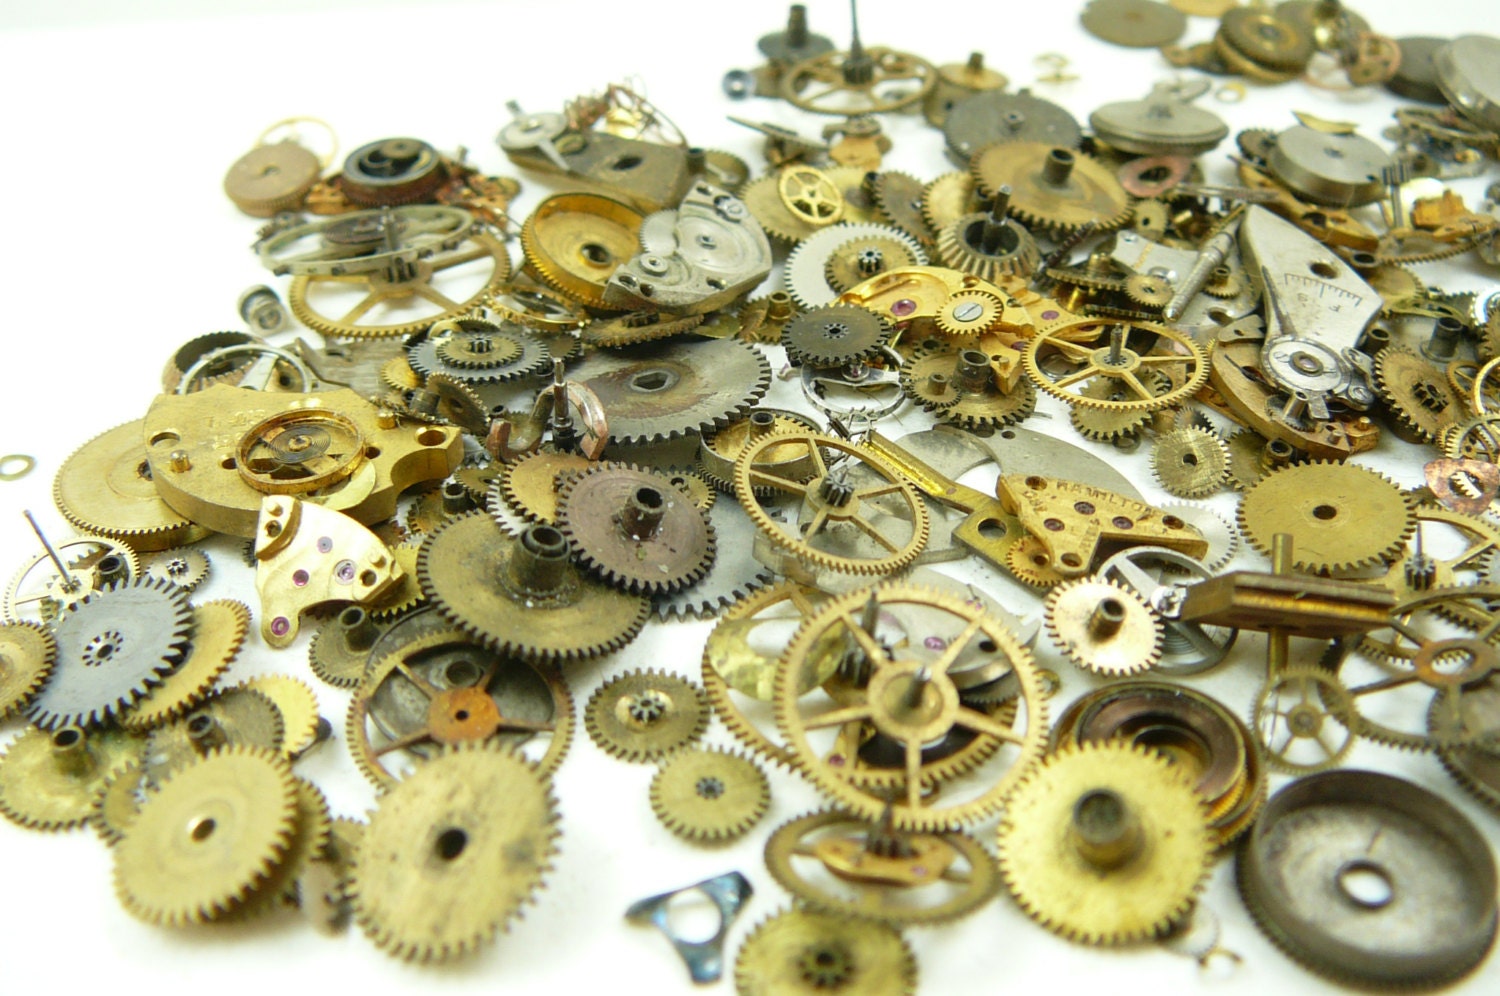 Assorted Watch Parts 1 oz. / GREAT for STEAMPUNK JEWERLY